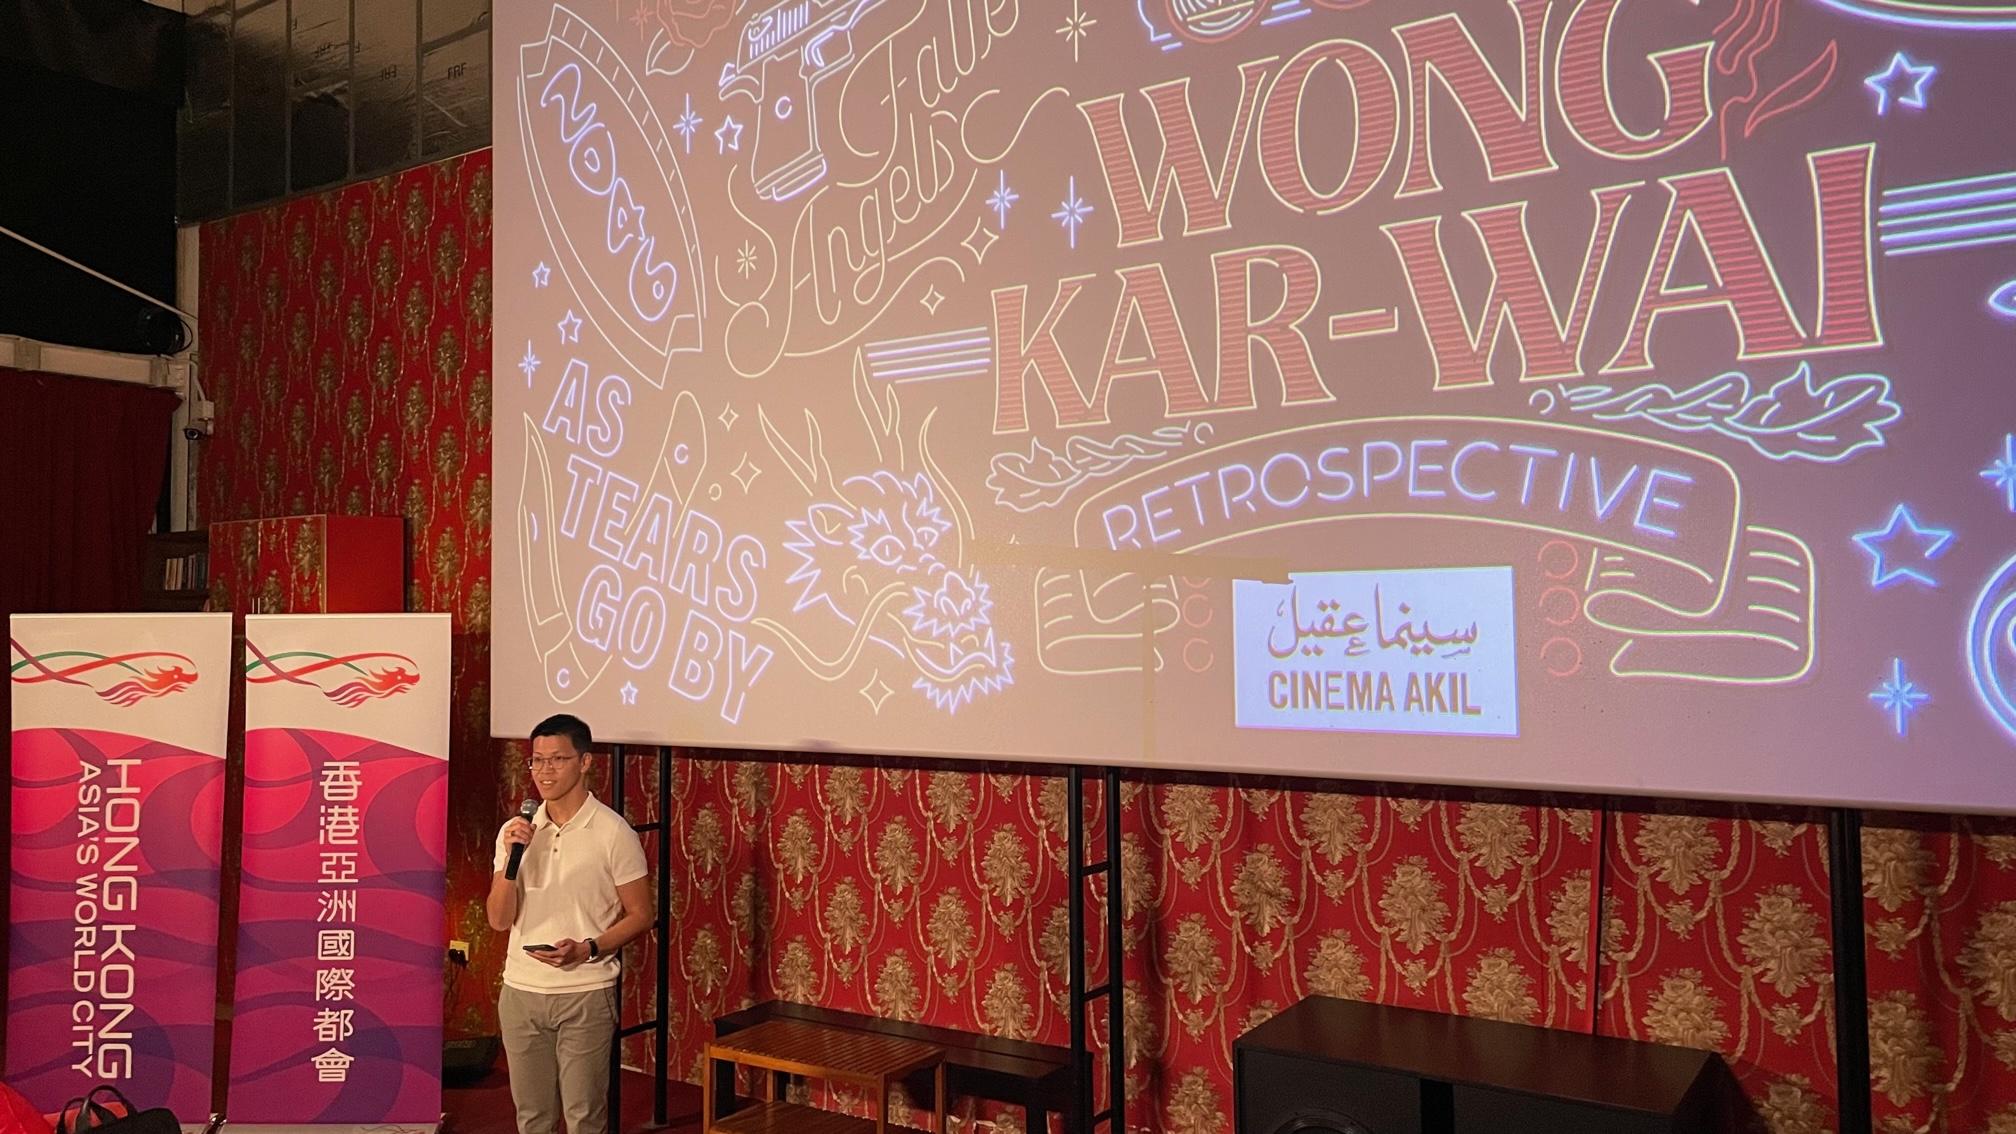 The works of famed Hong Kong film director Wong Kar-wai are on display at a retrospective supported by the Hong Kong Economic and Trade Office in Dubai (Dubai ETO) at Dubai’s Cinema Akil from May 12 to 28 (Dubai time). Photo shows Deputy Director of the Dubai ETO Mr Alvin Wong, speaking at the opening night of the retrospective.